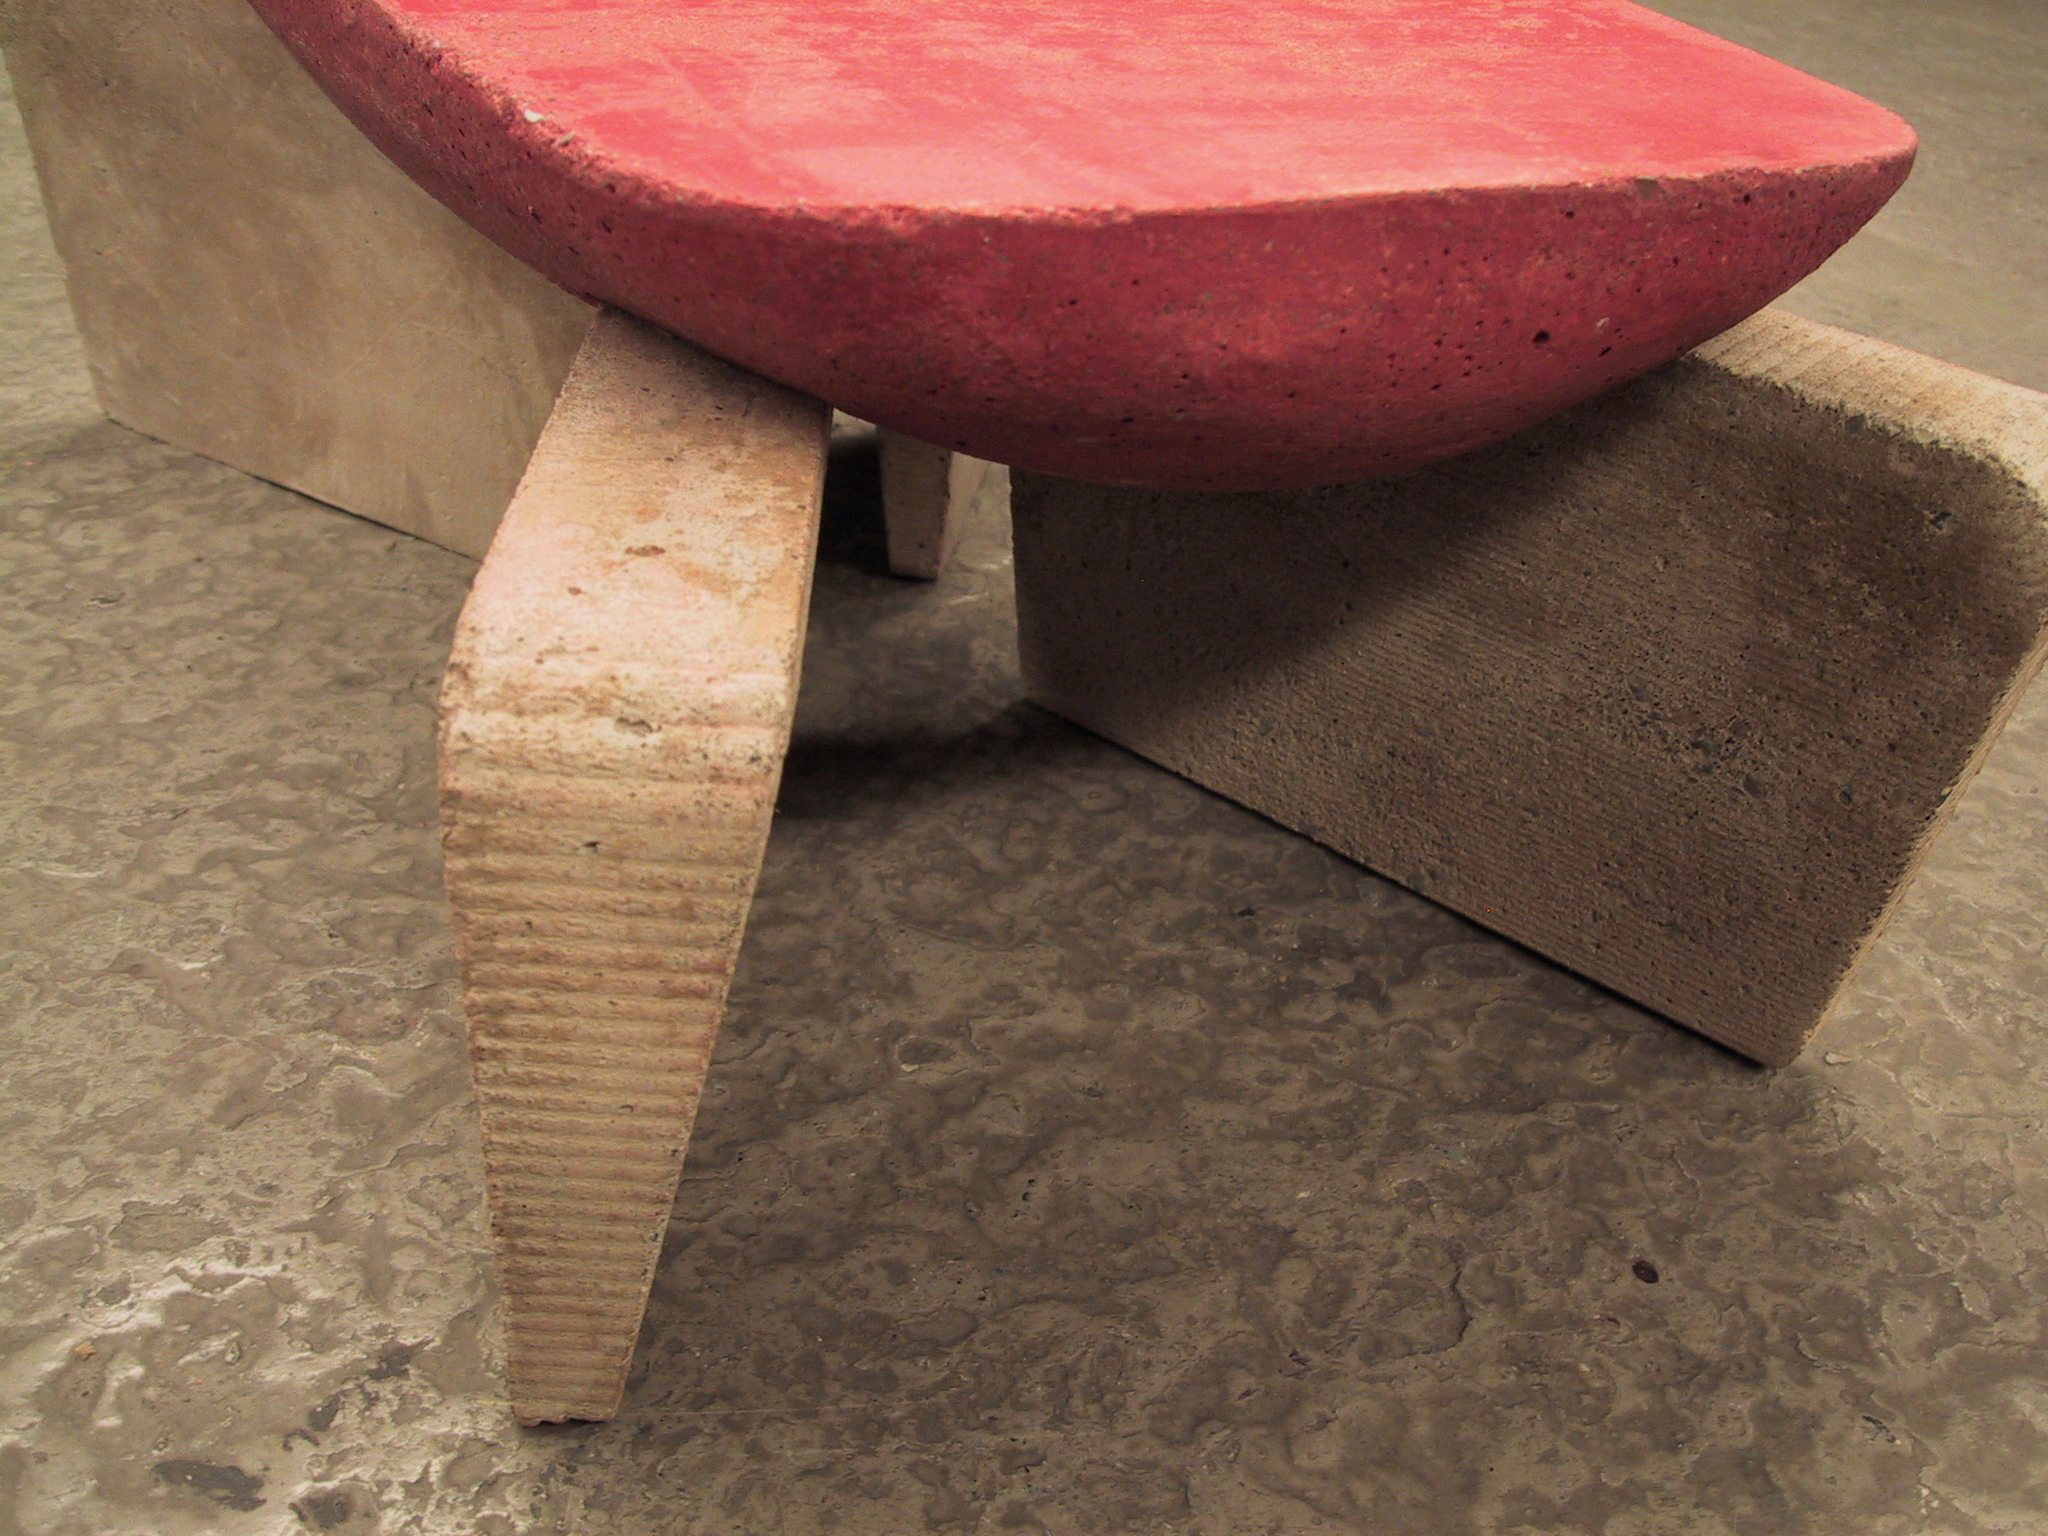 Corb table (2002) detail